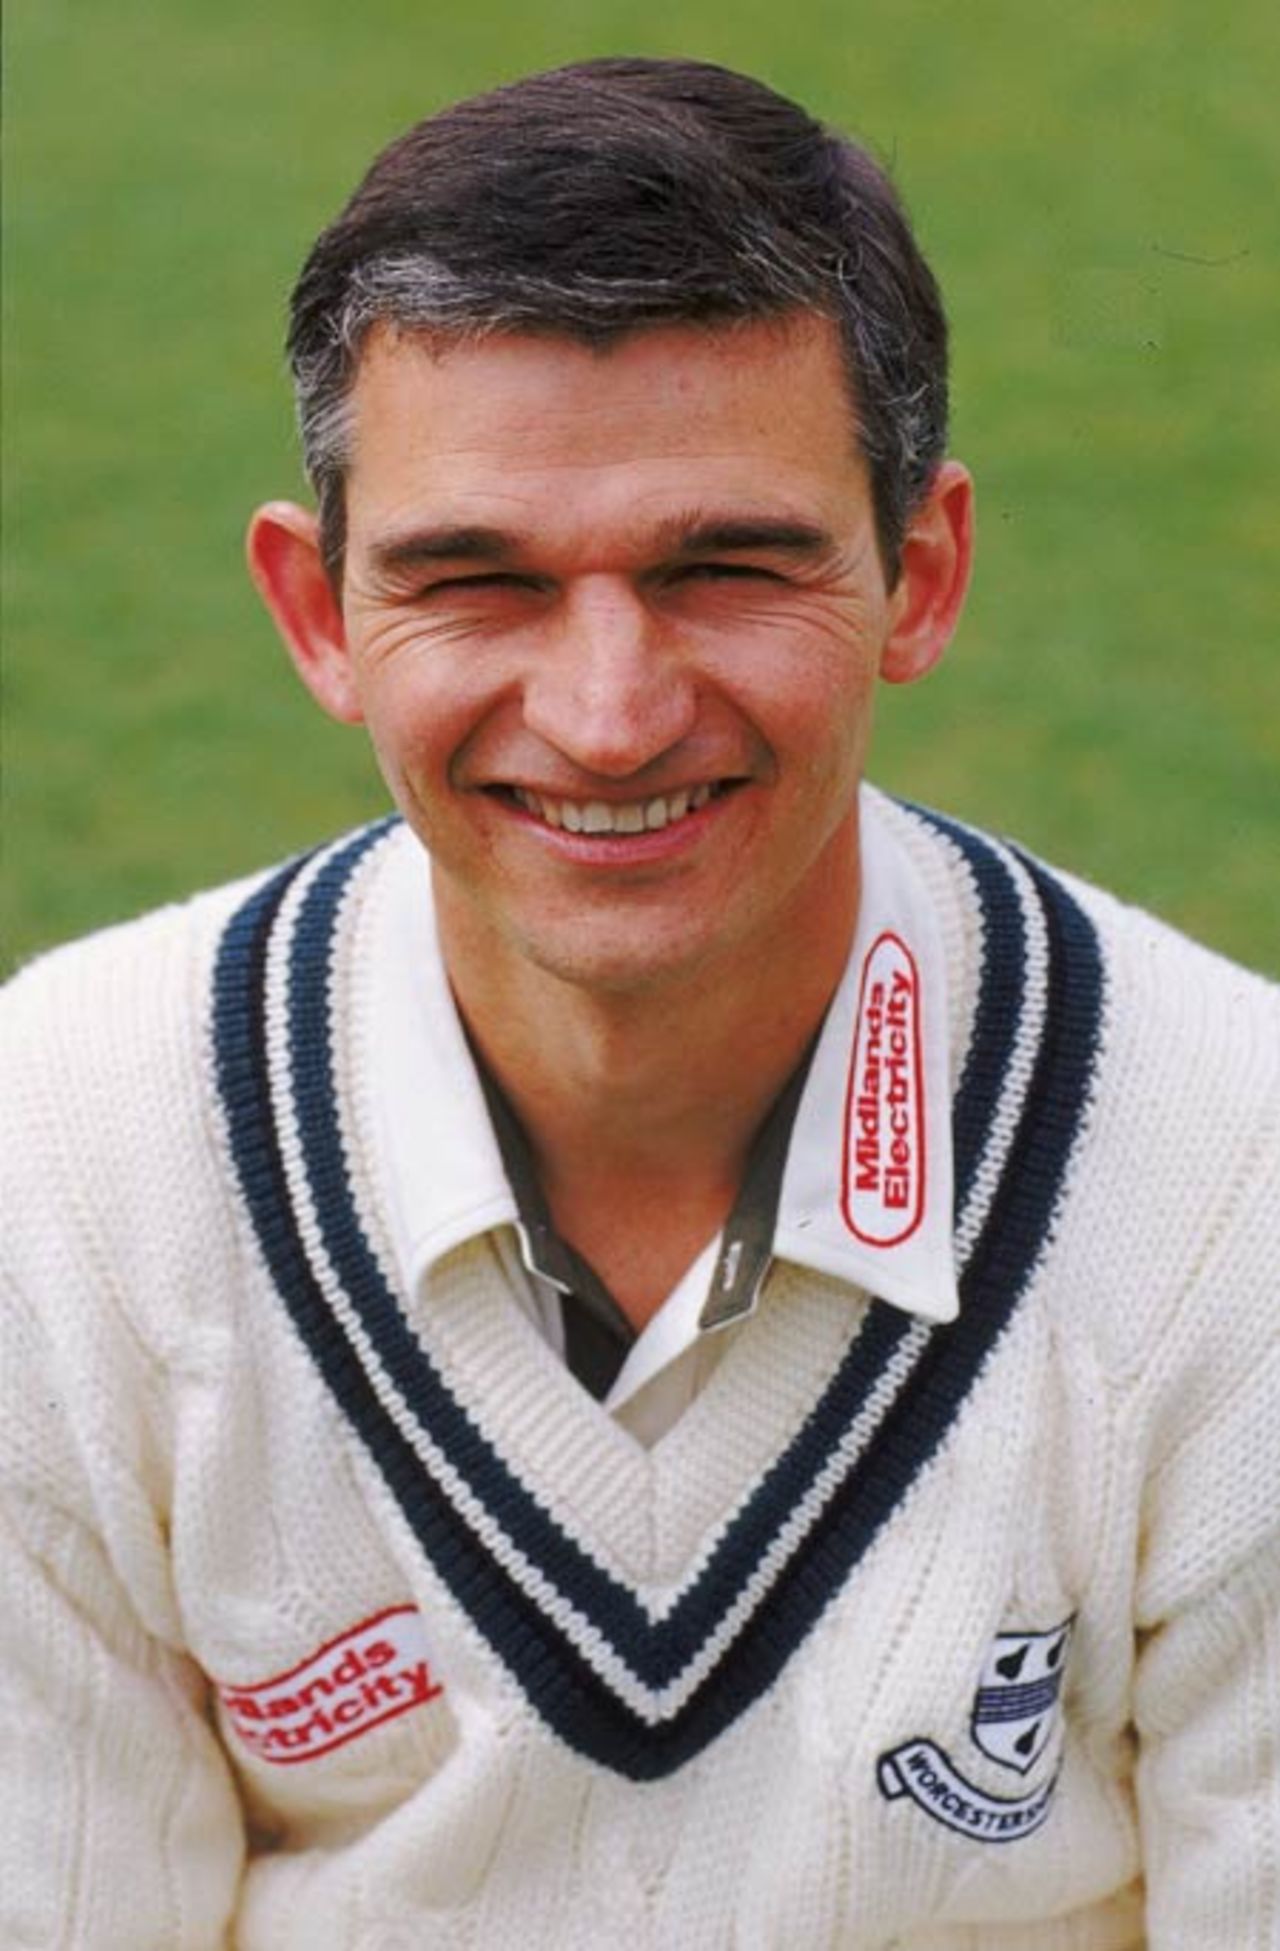 14 Apr 2000: Portrait of David Leatherdale taken during a Worcestershire County Cricket Club photocall at New Road in Worcester, England.